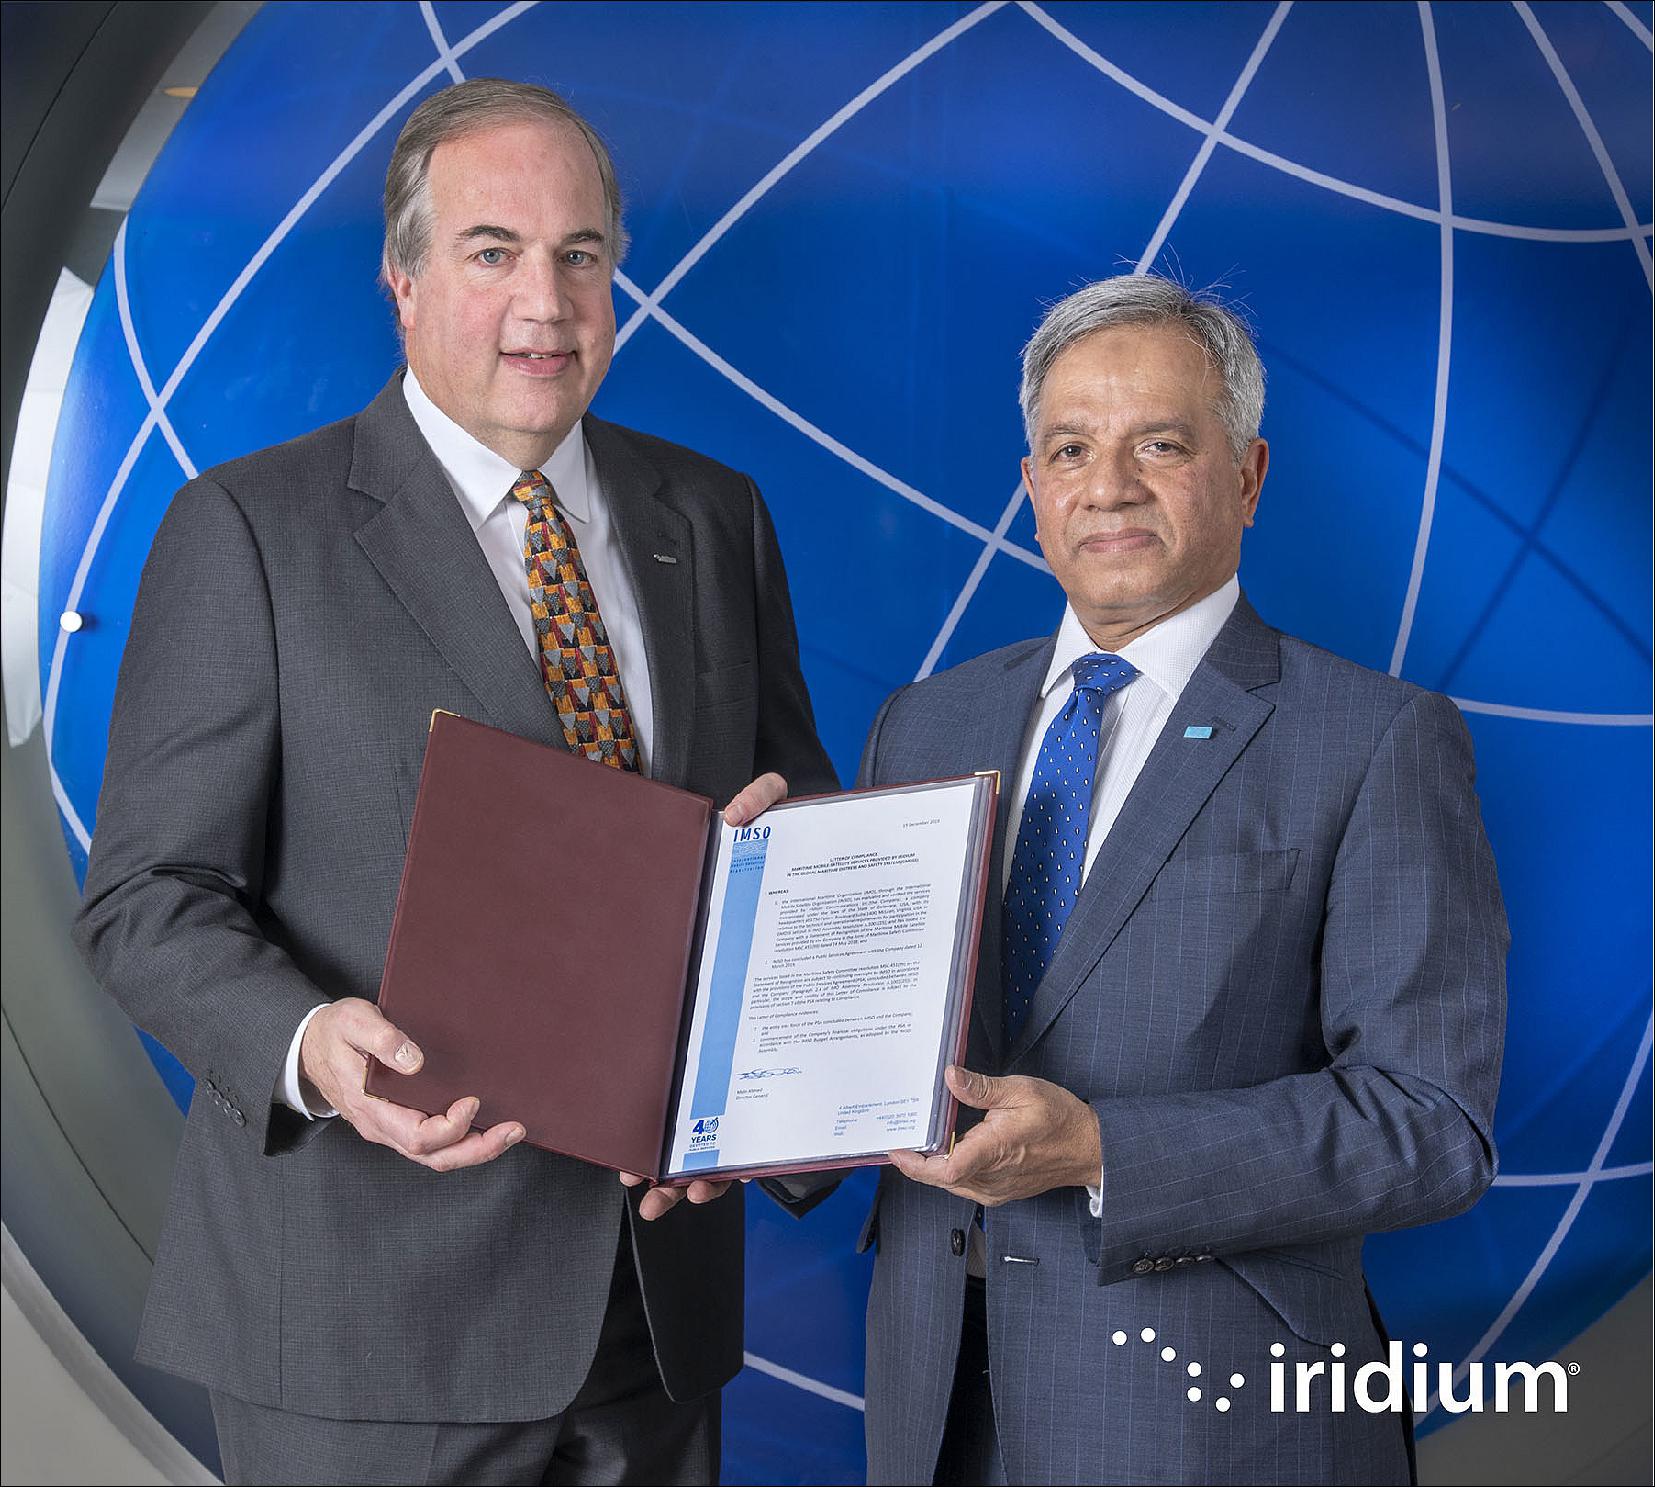 Figure 10: Iridium CEO Matt Desch receives the Letter of Compliance for Iridium to provide GMDSS services from Captain Moin Ahmed, Director General of the International Mobile Satellite Organization (image credit: Iridium)